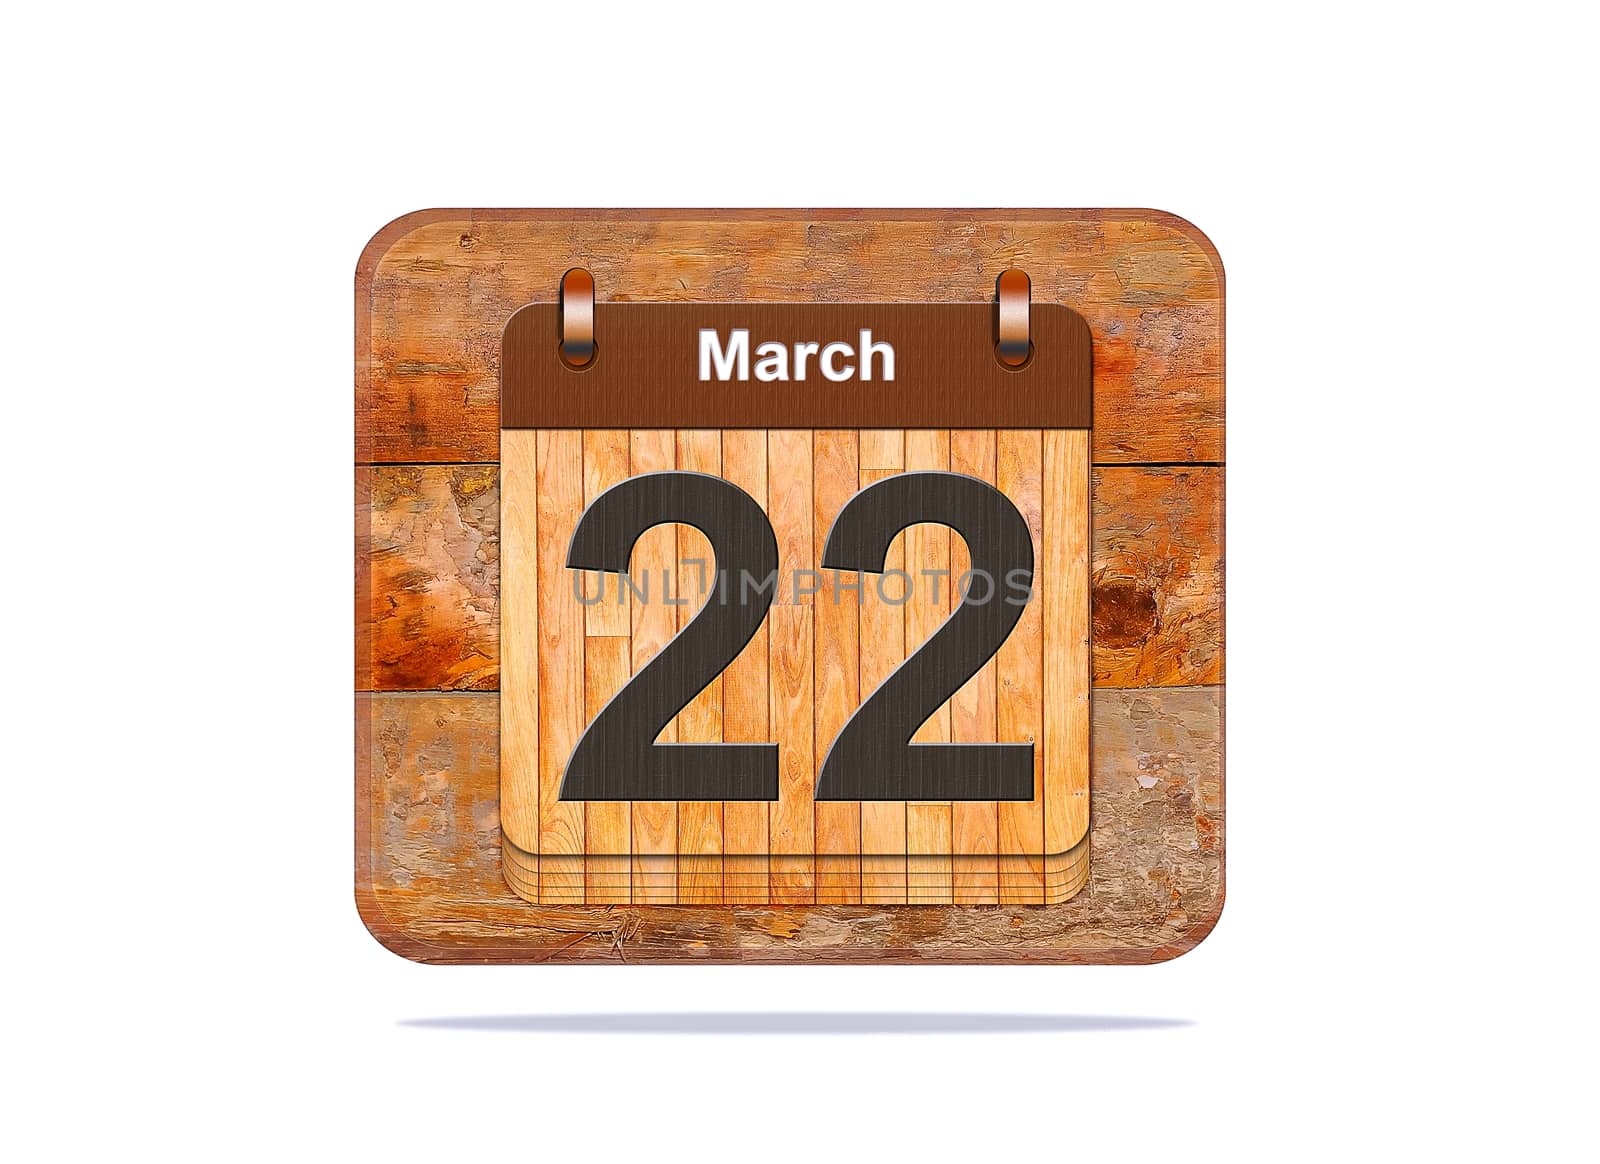 Calendar with the date of March 22.